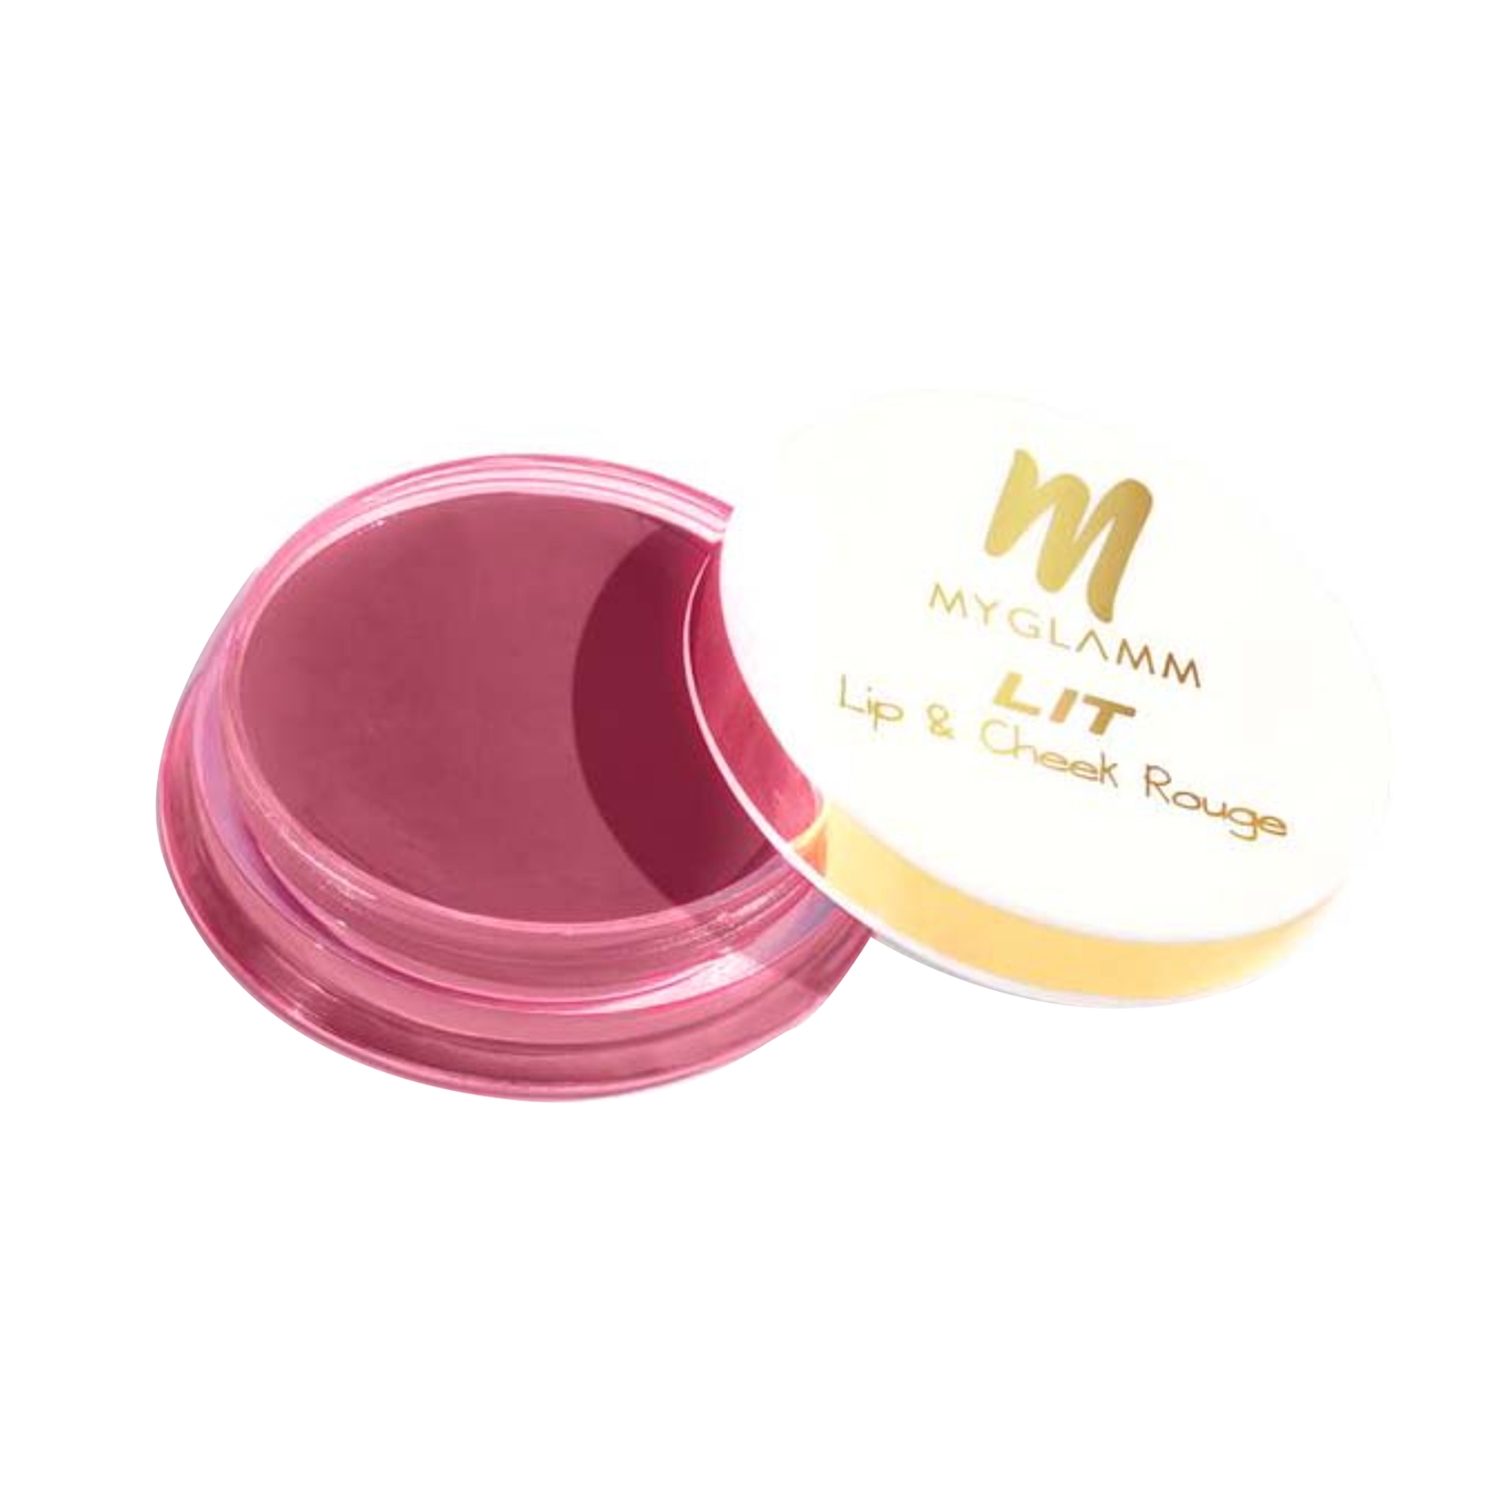 MyGlamm Lip and Cheek Rouge - Berry Bliss (10g)